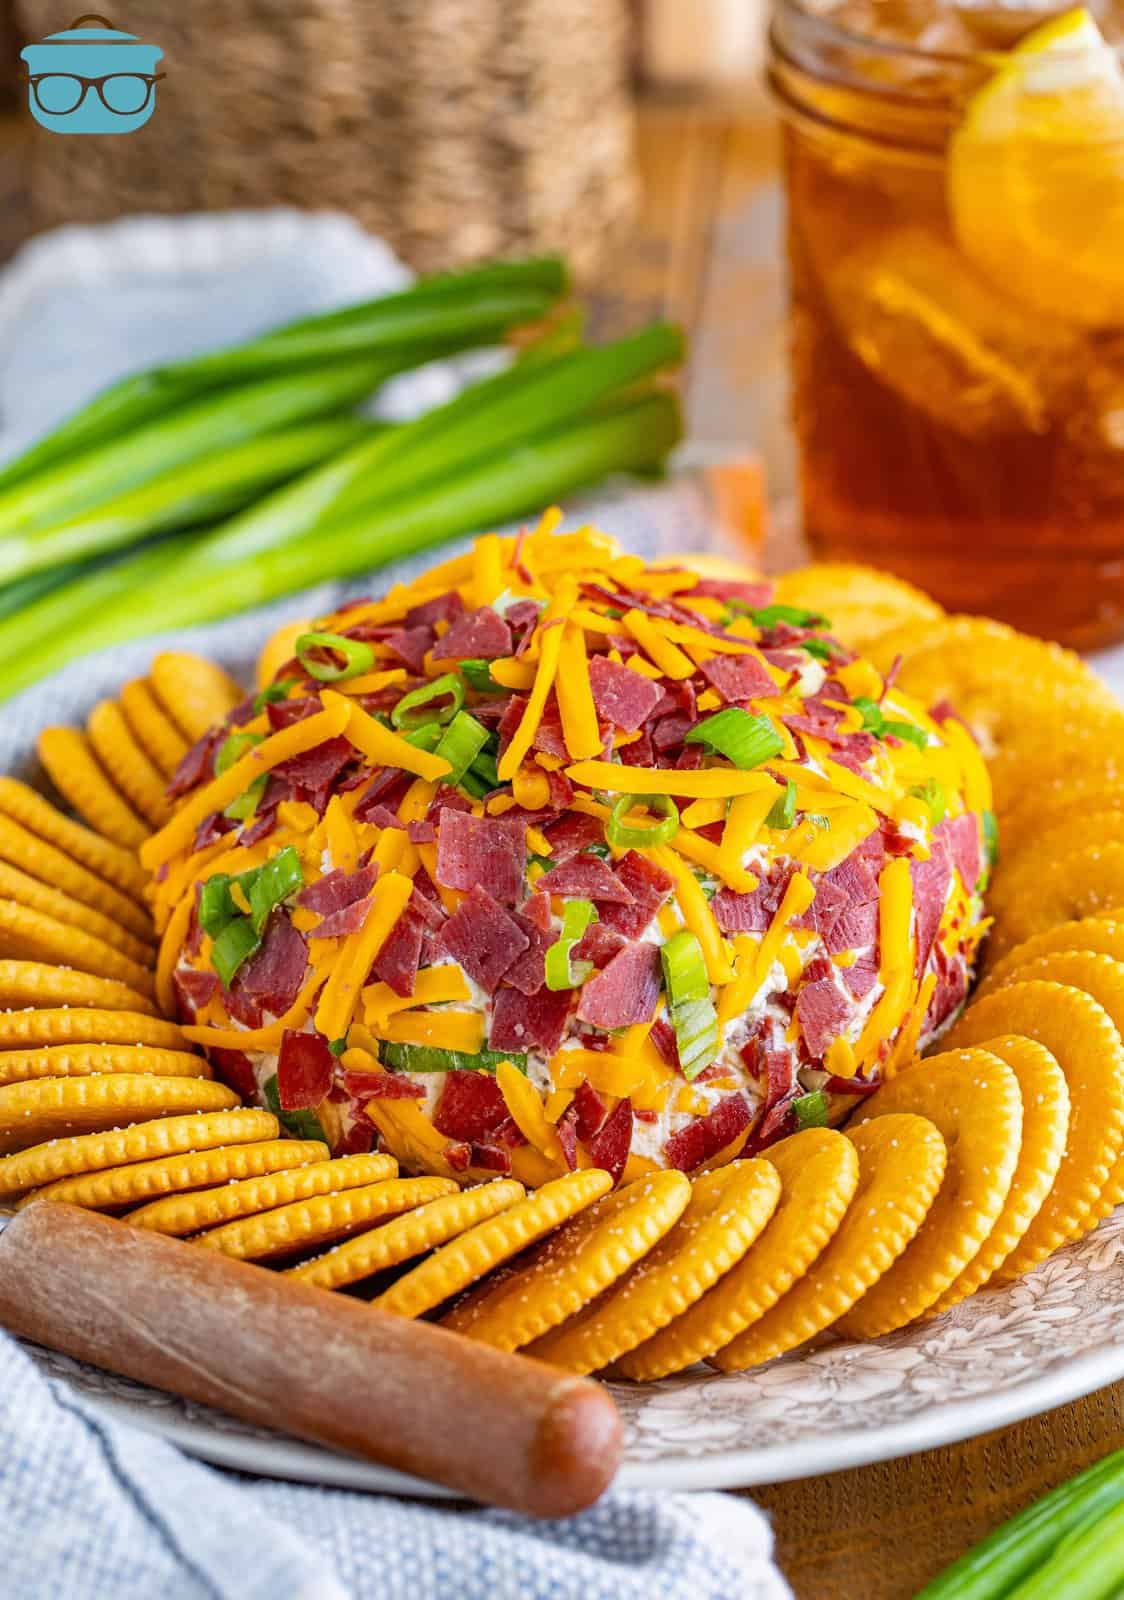 A dried beef cheeseball with crackers around it on a serving plate.